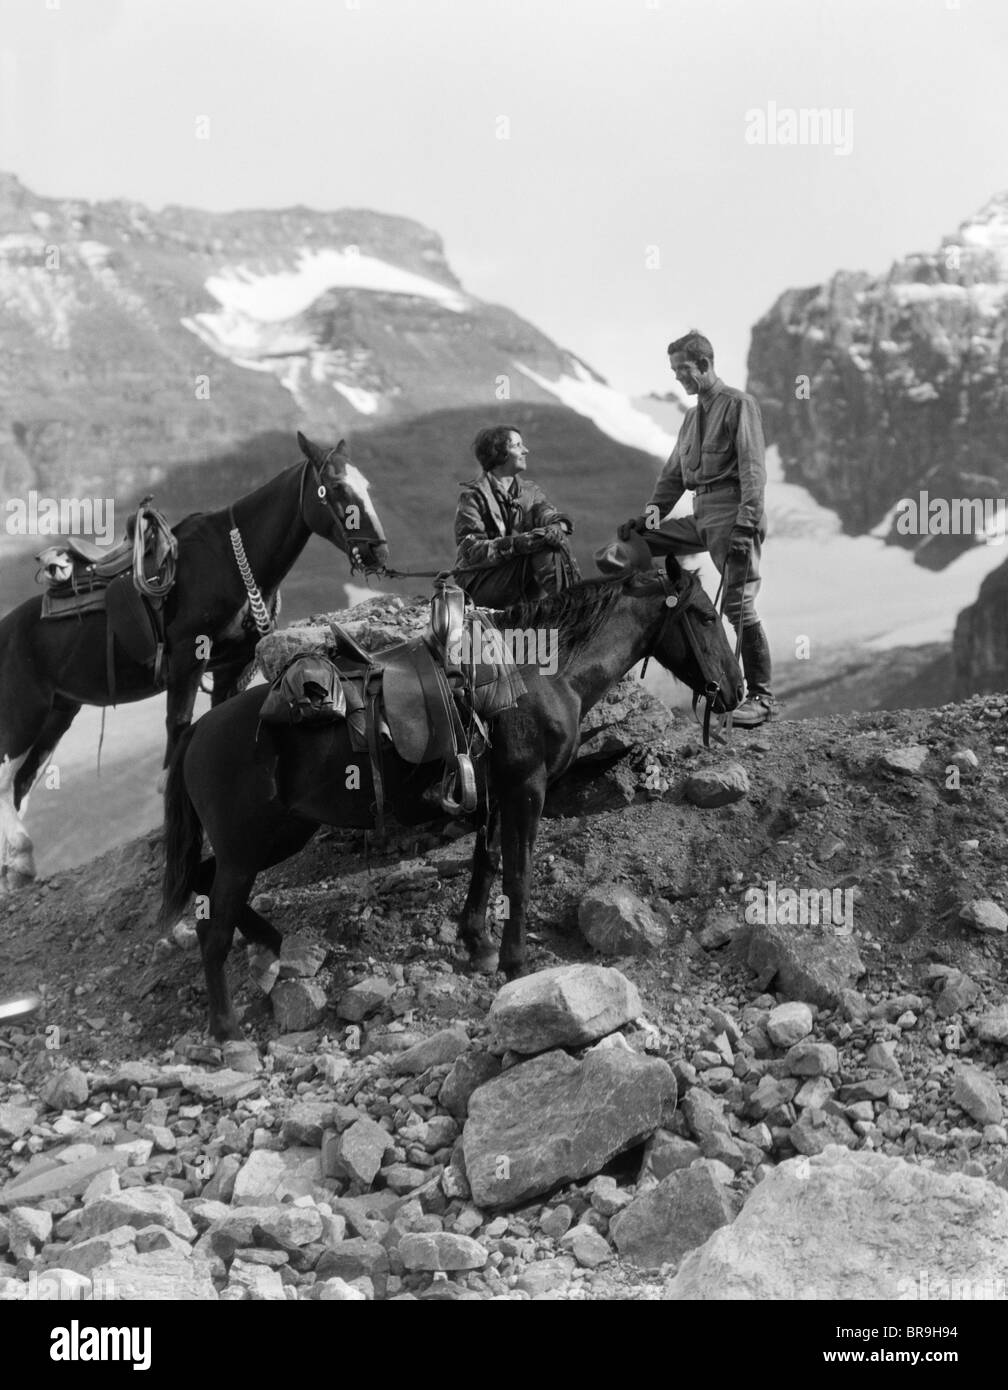 1920s 1930s COUPLE MAN WOMAN WEARING RIDING GEAR JODHPURS BOOTS SPURS SITTING STANDING ON LARGE ROCK BY TWO HORSES Stock Photo